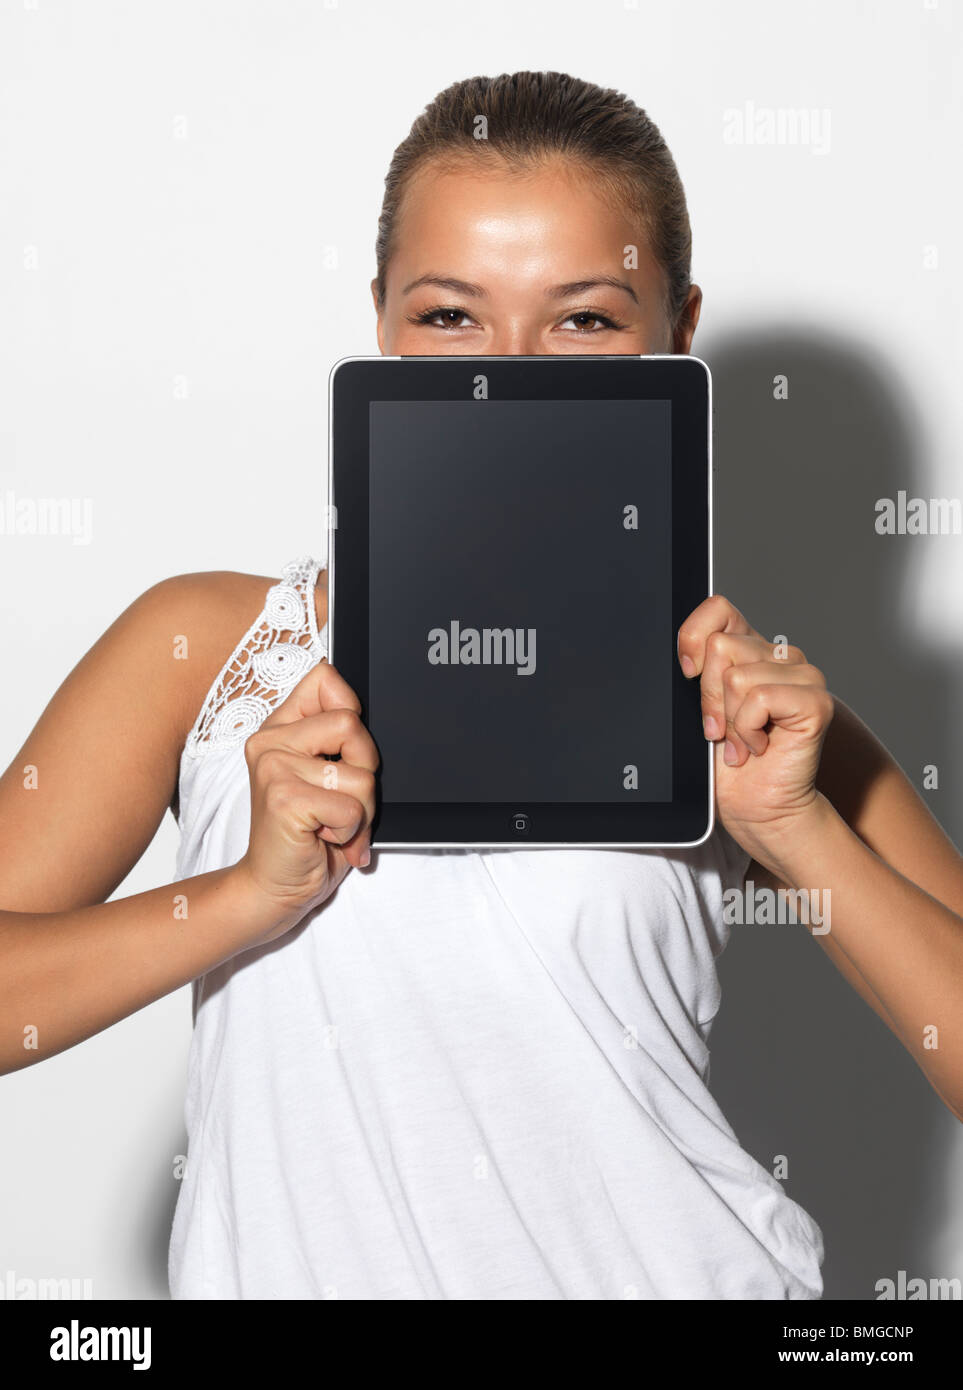 Photo Of Smiling Girl With Apple IPad 3G Tablet Stock Image, 53% OFF